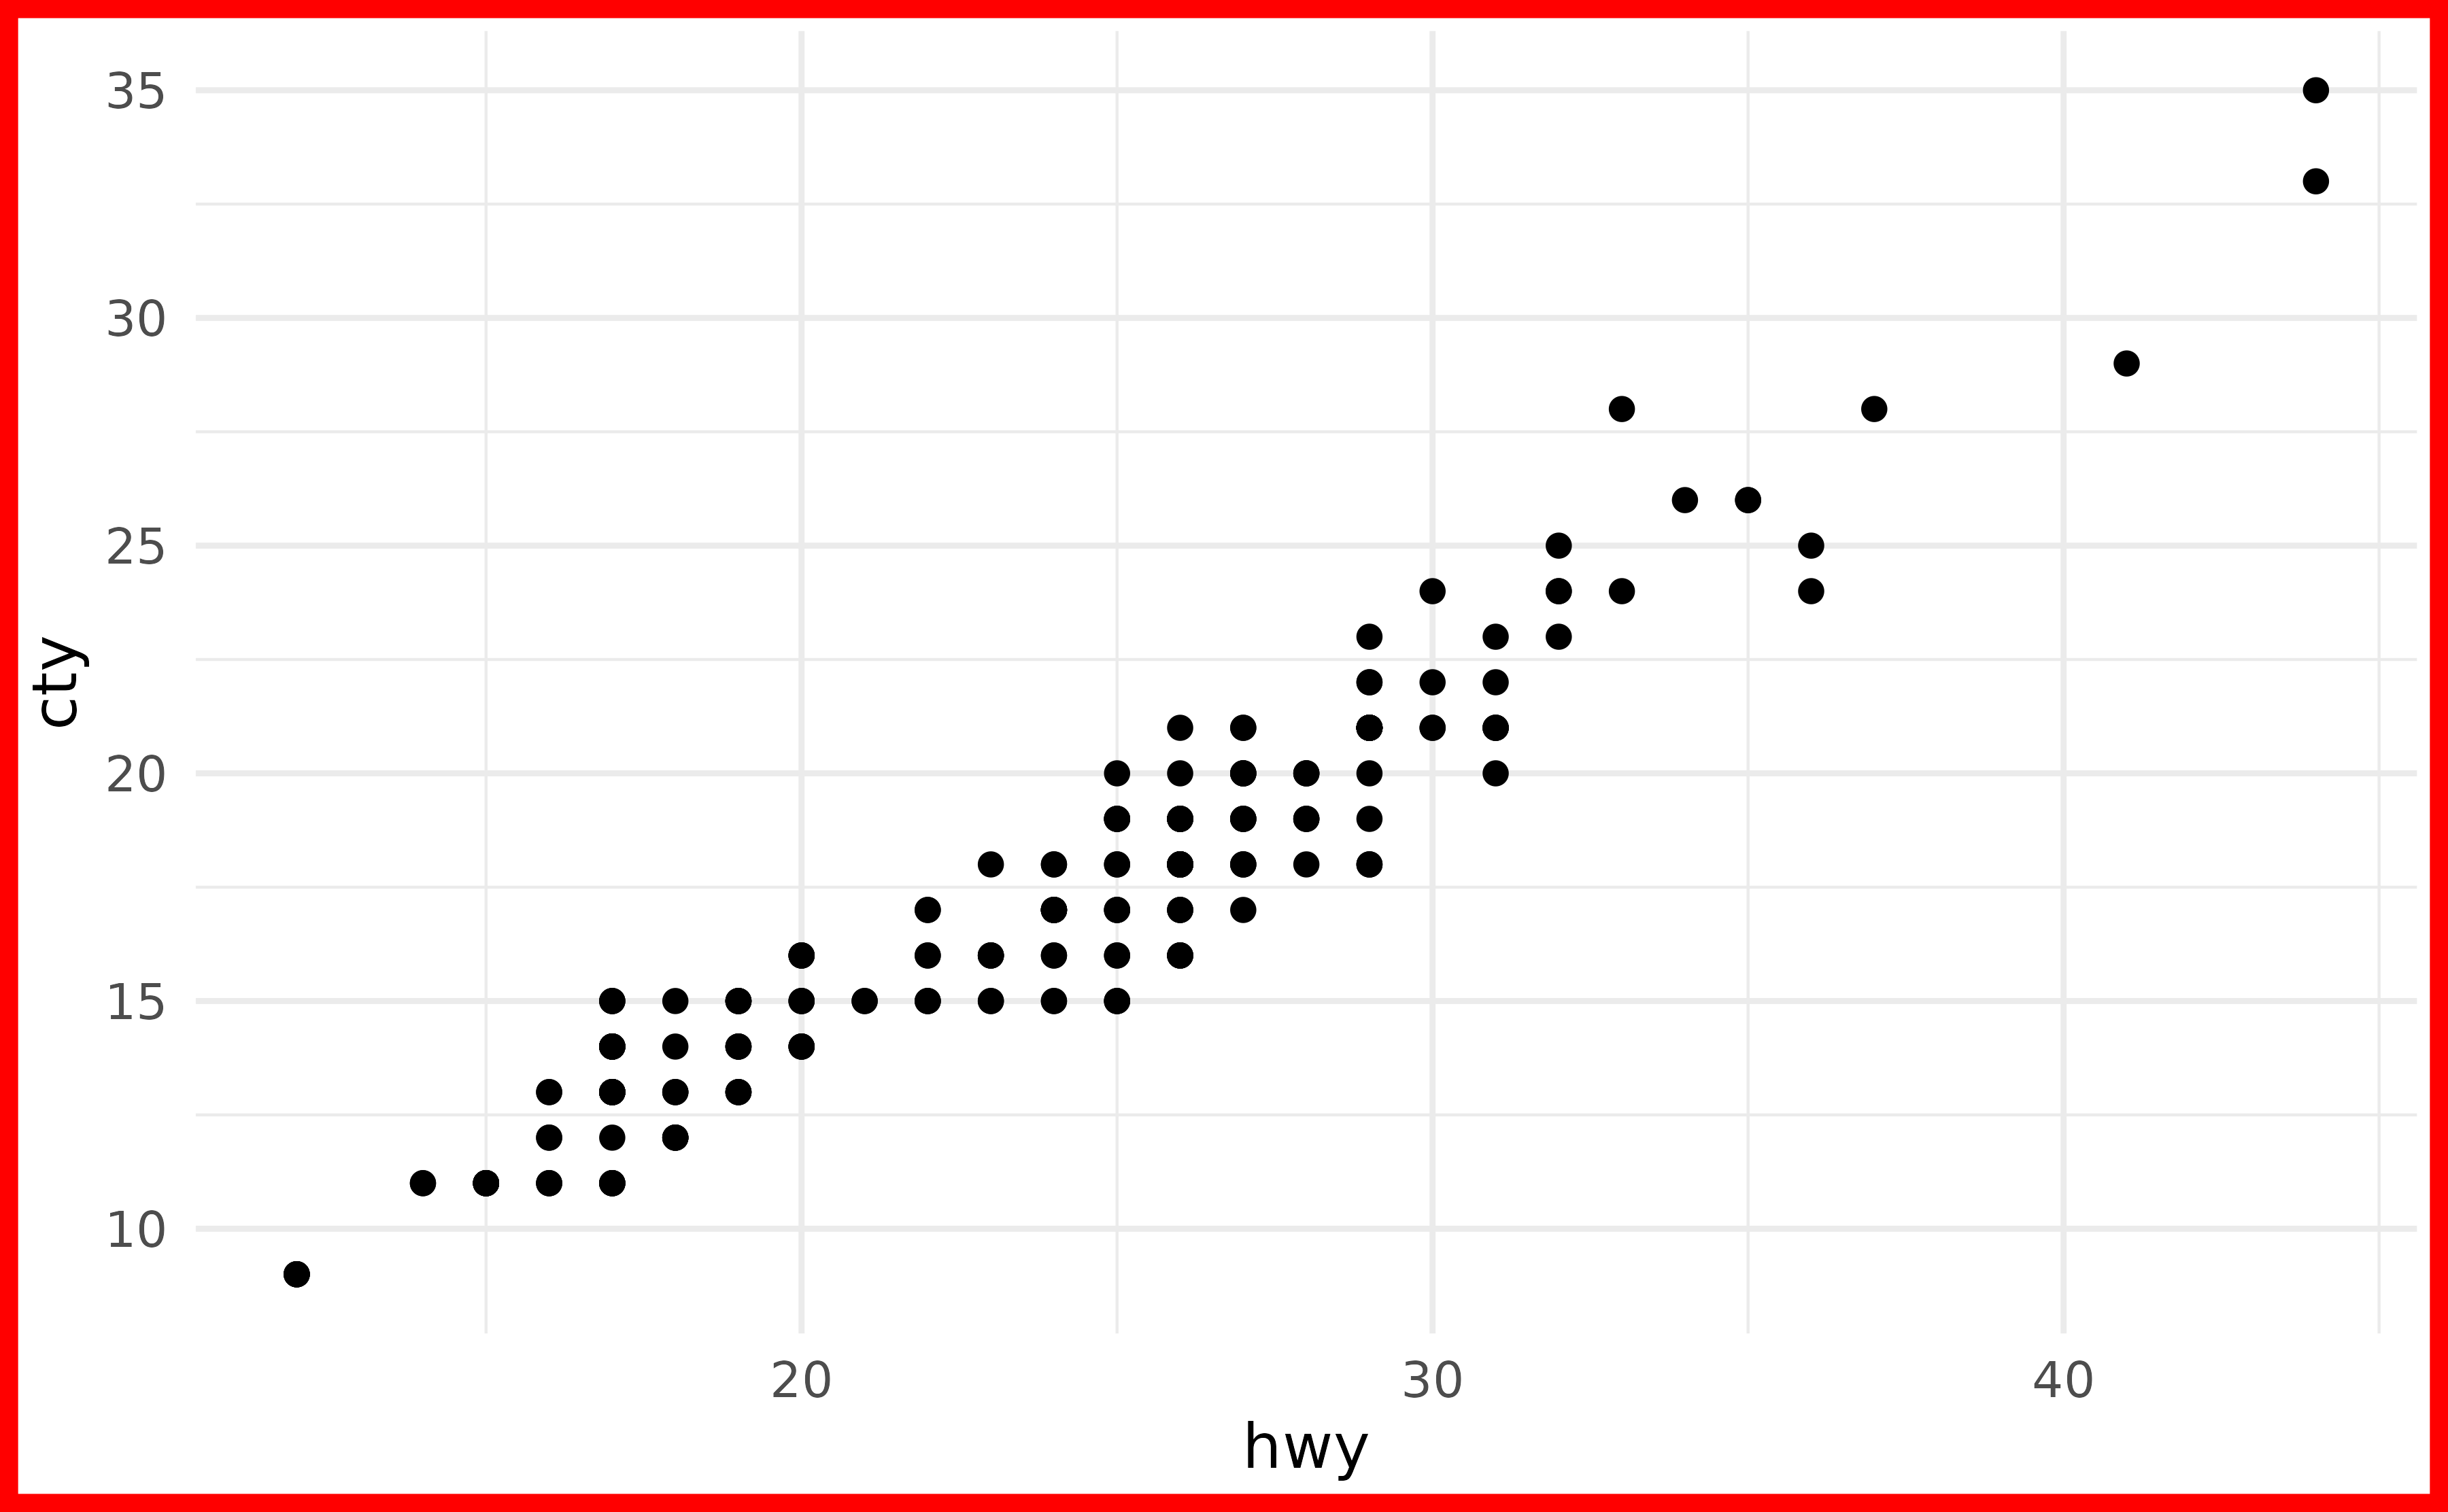 A scatter plot showing the highway miles per gallon on the x-axis and city miles per gallon on the y-axis. There is no visible panel background and grid lines are in light grey. The plot as a whole is outlined by a thick red line.